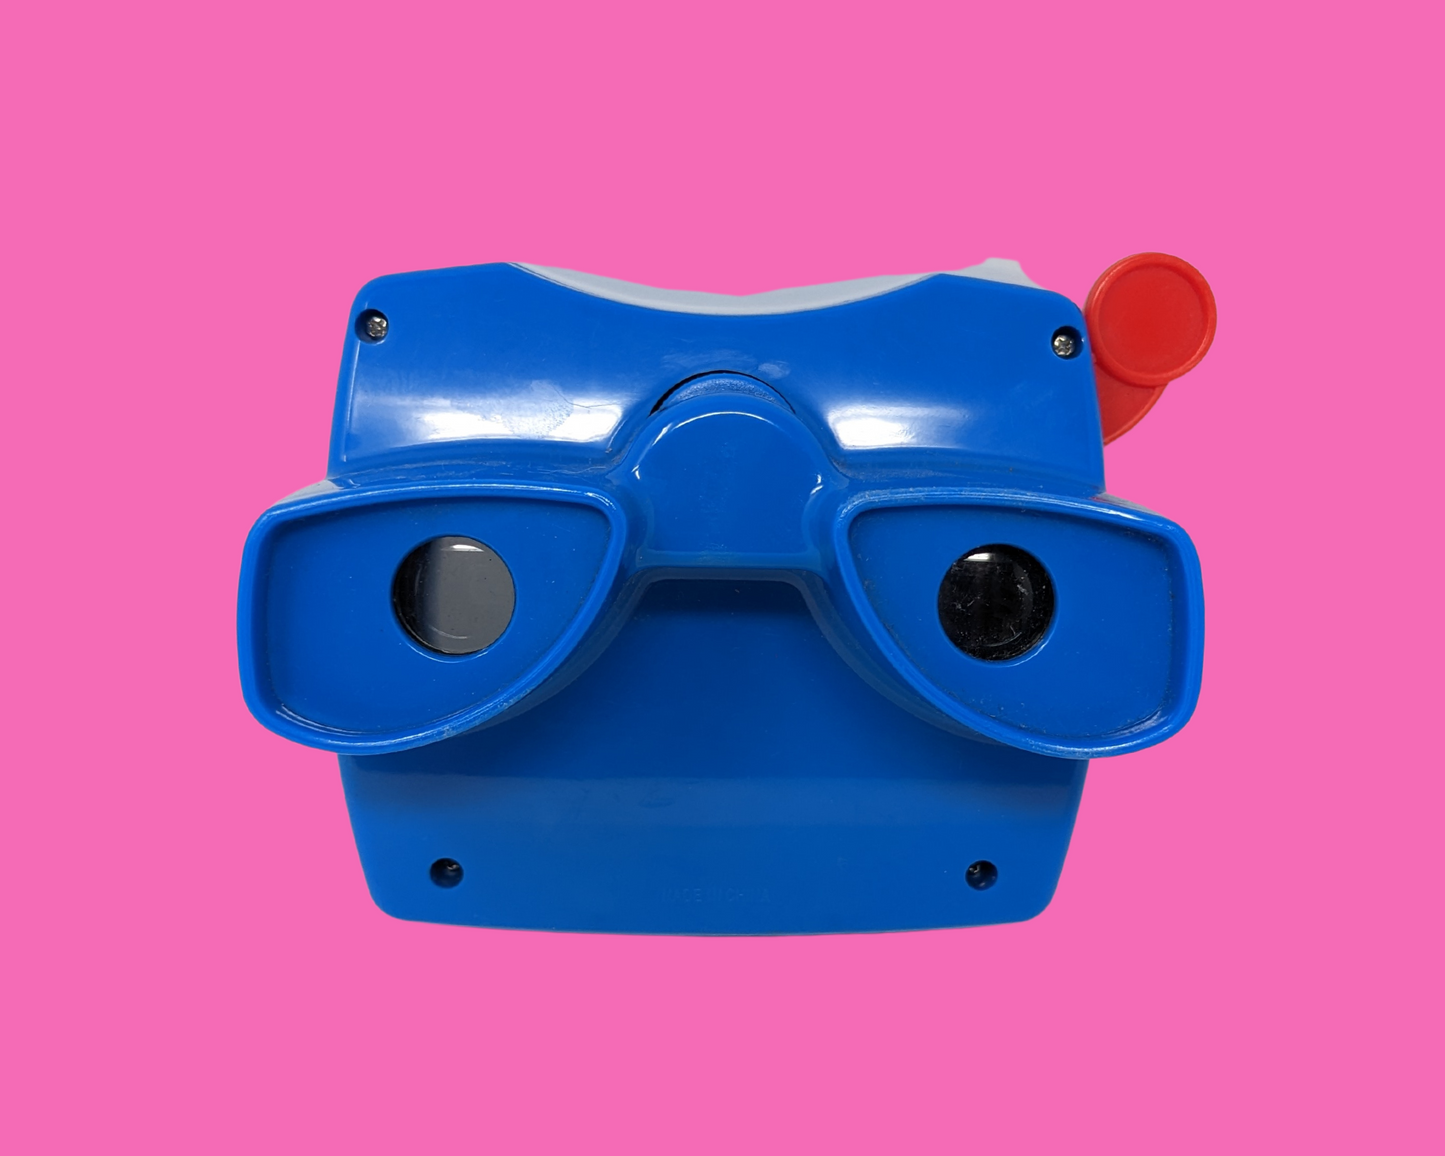 Vintage 1990's 3D Viewer, Blue View Master